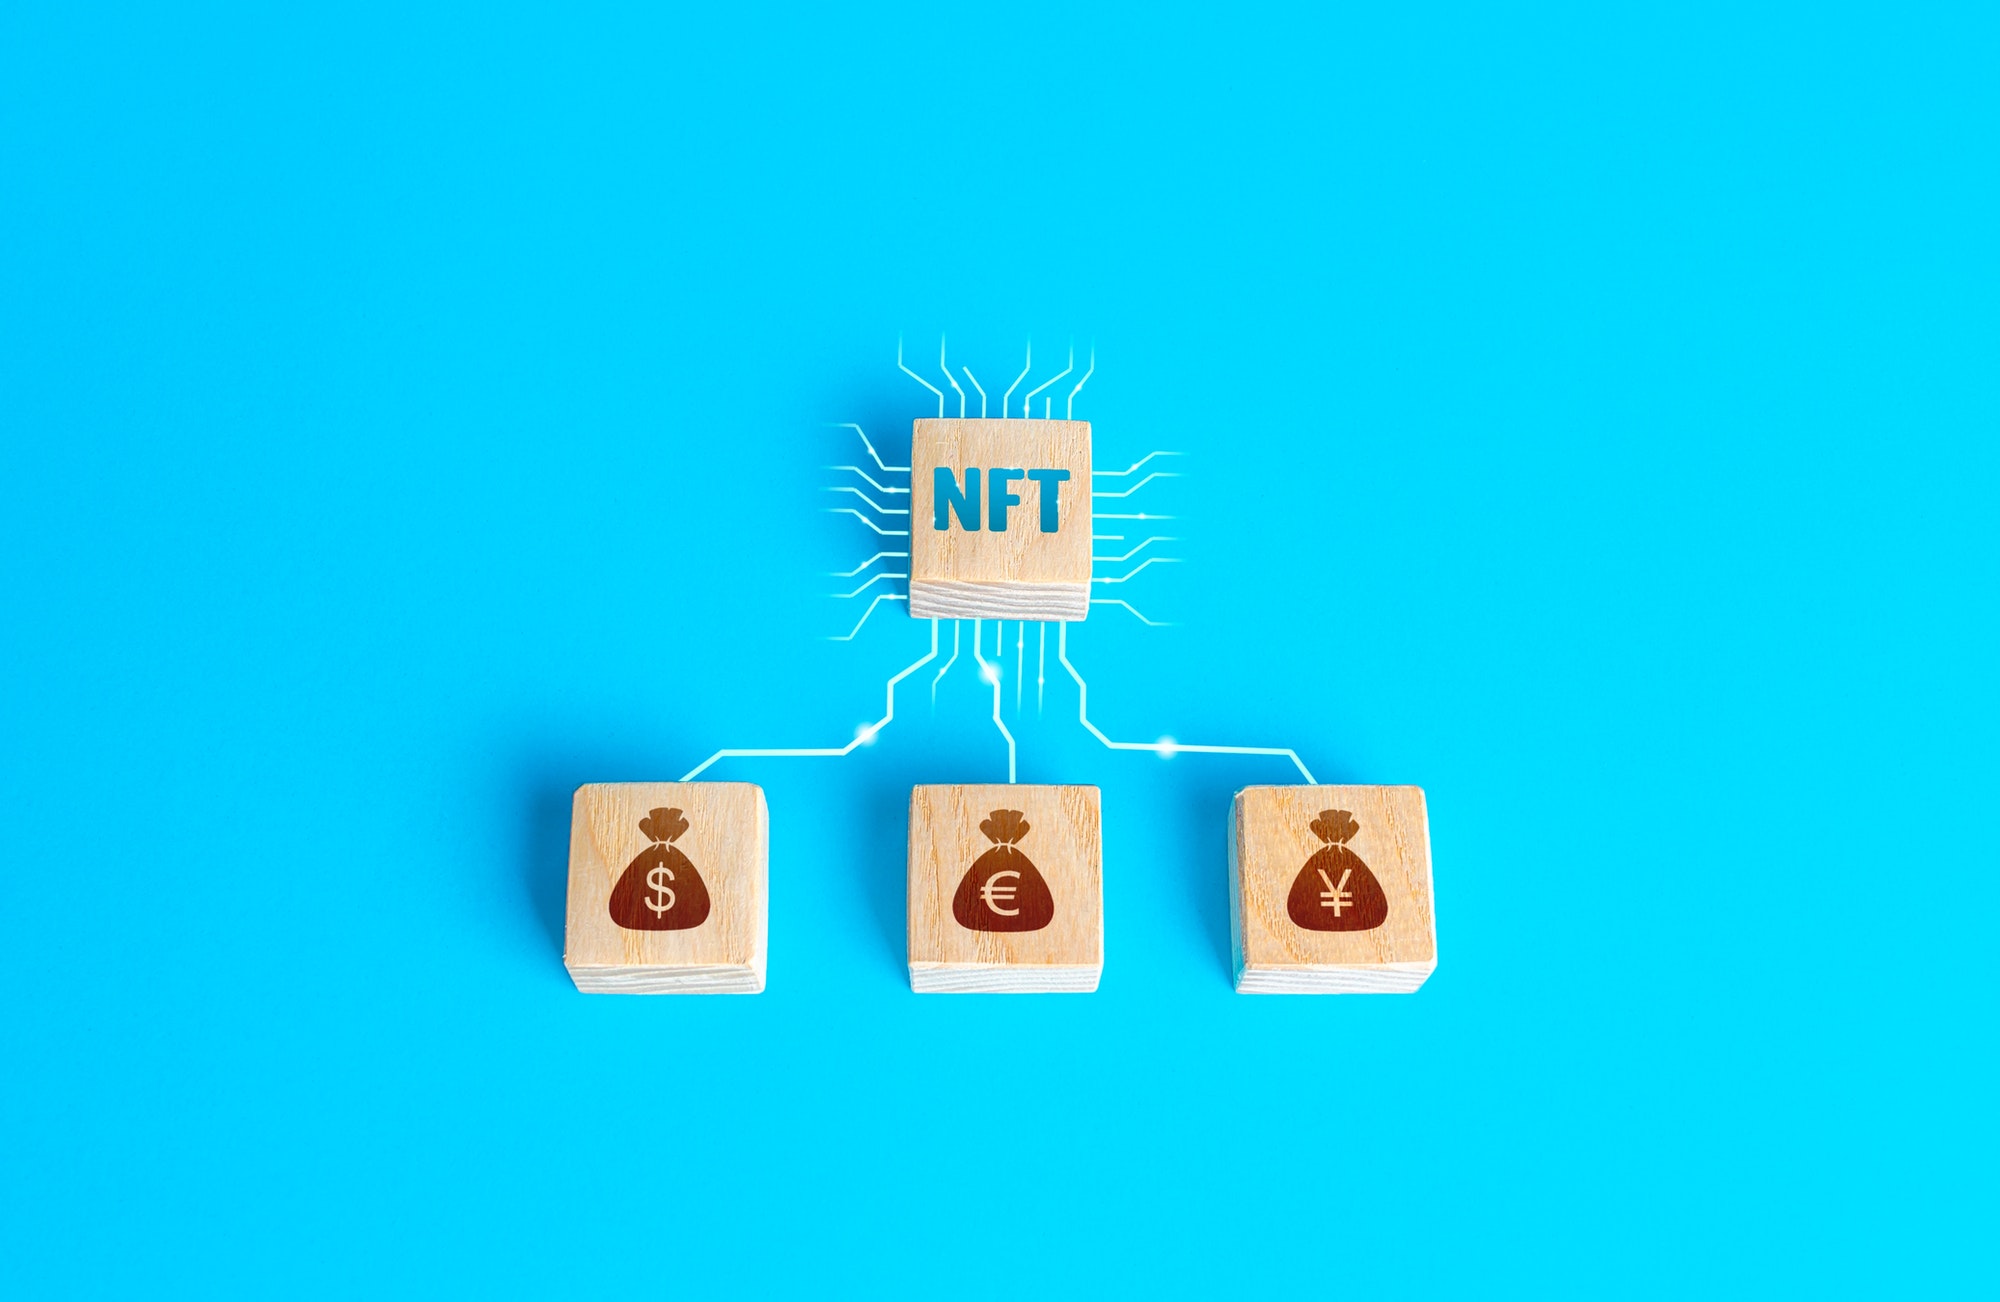 Blocks NFT non-fungible token and money connected by lines. Selling digital assets and art